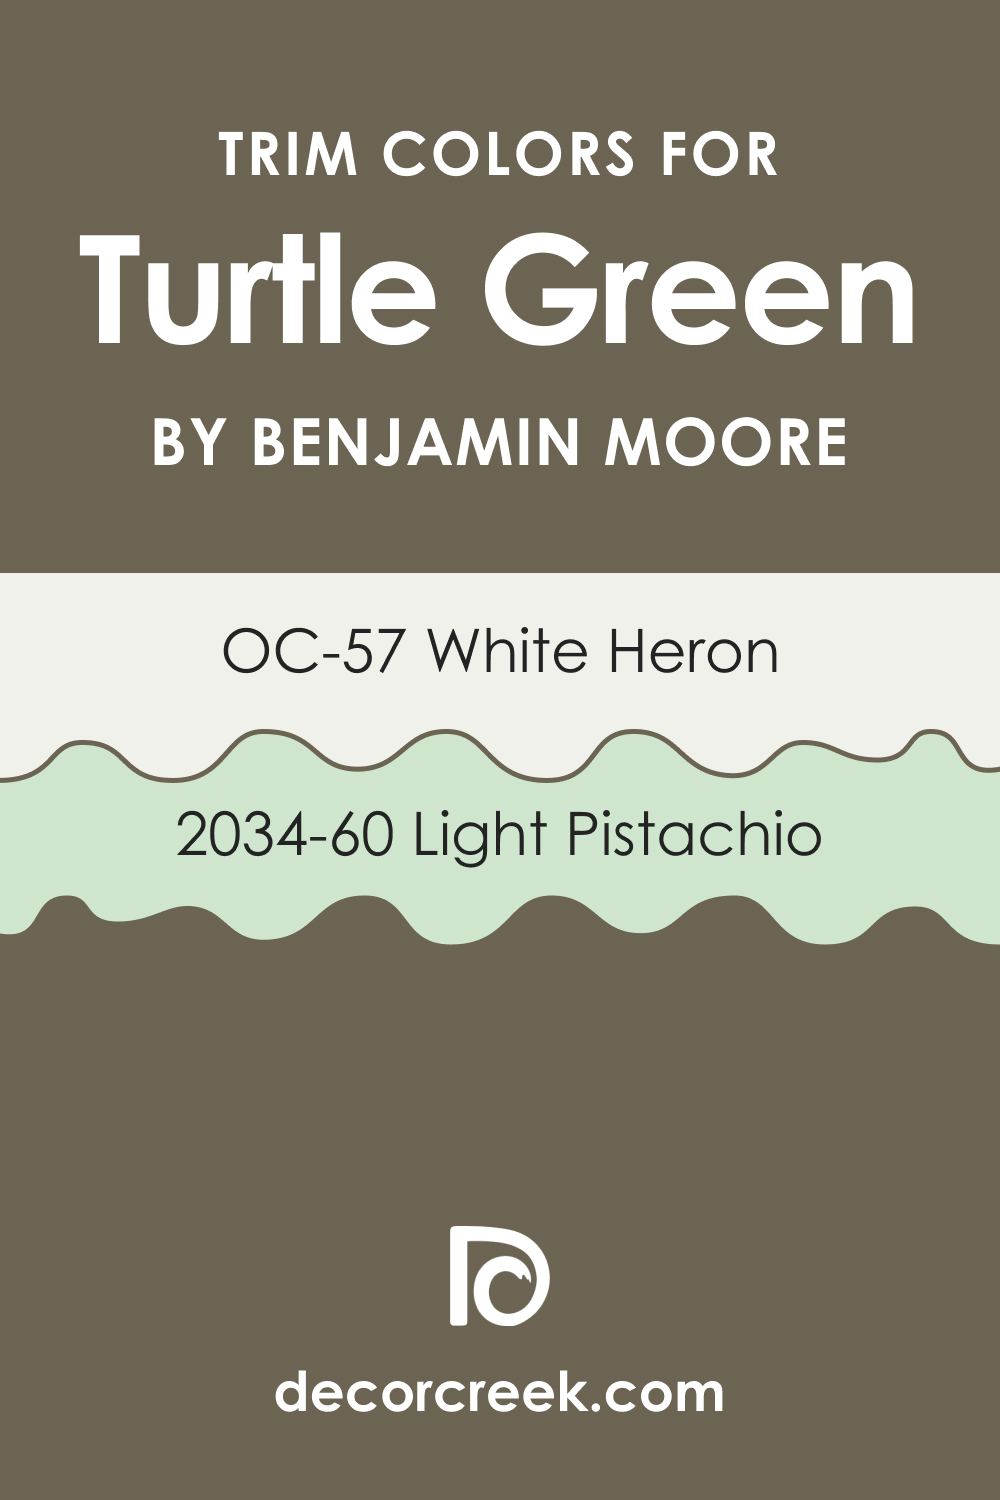 Trim Colors of Turtle Green 2142-20